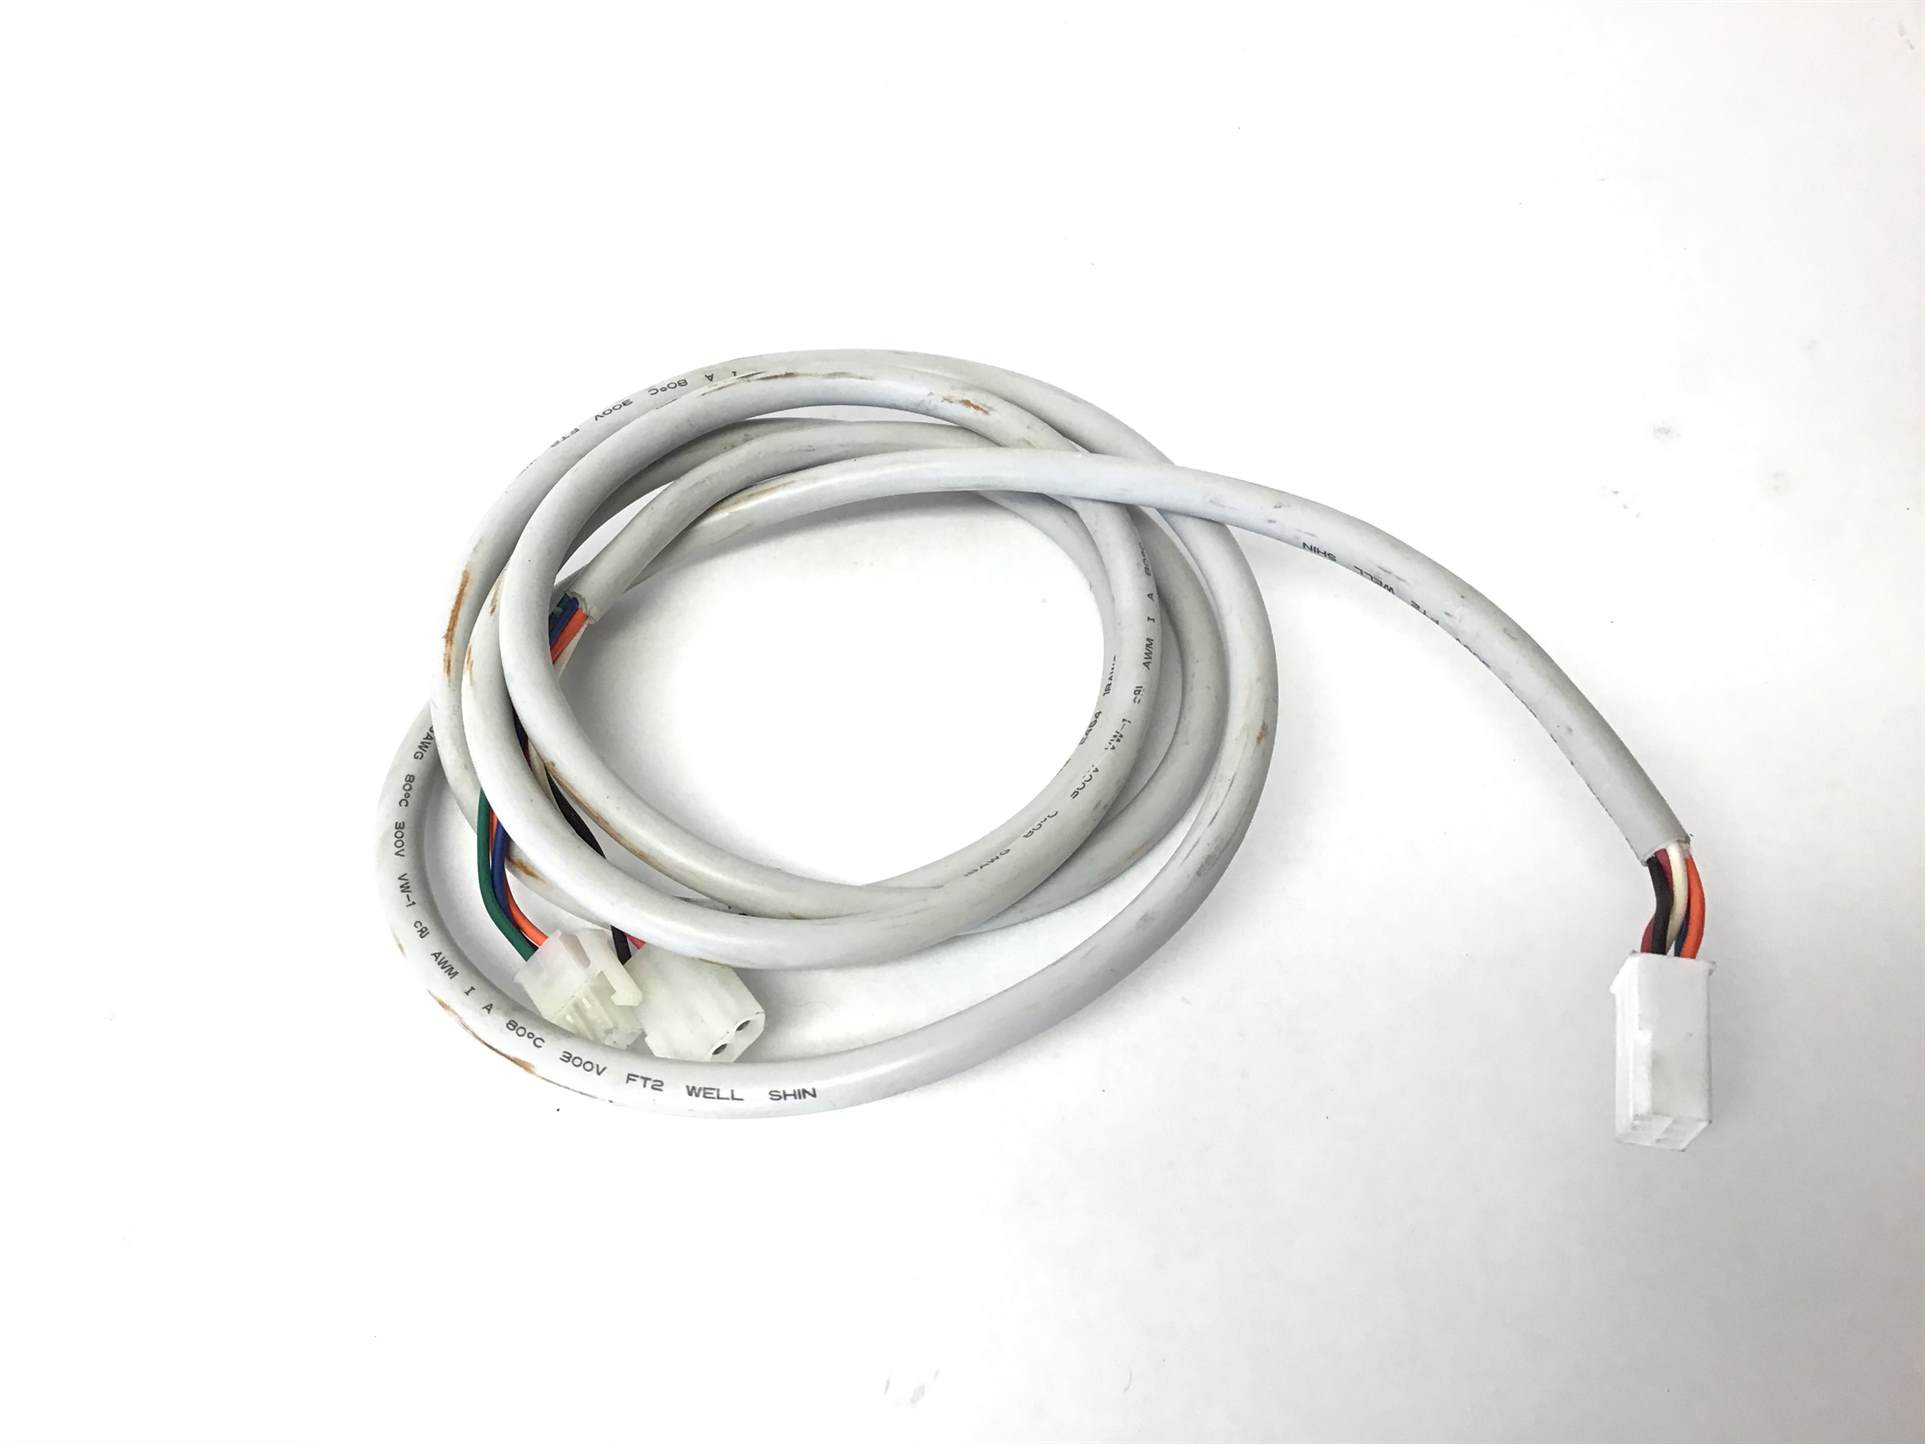 Incline Wire Harness Interconnect (Used)